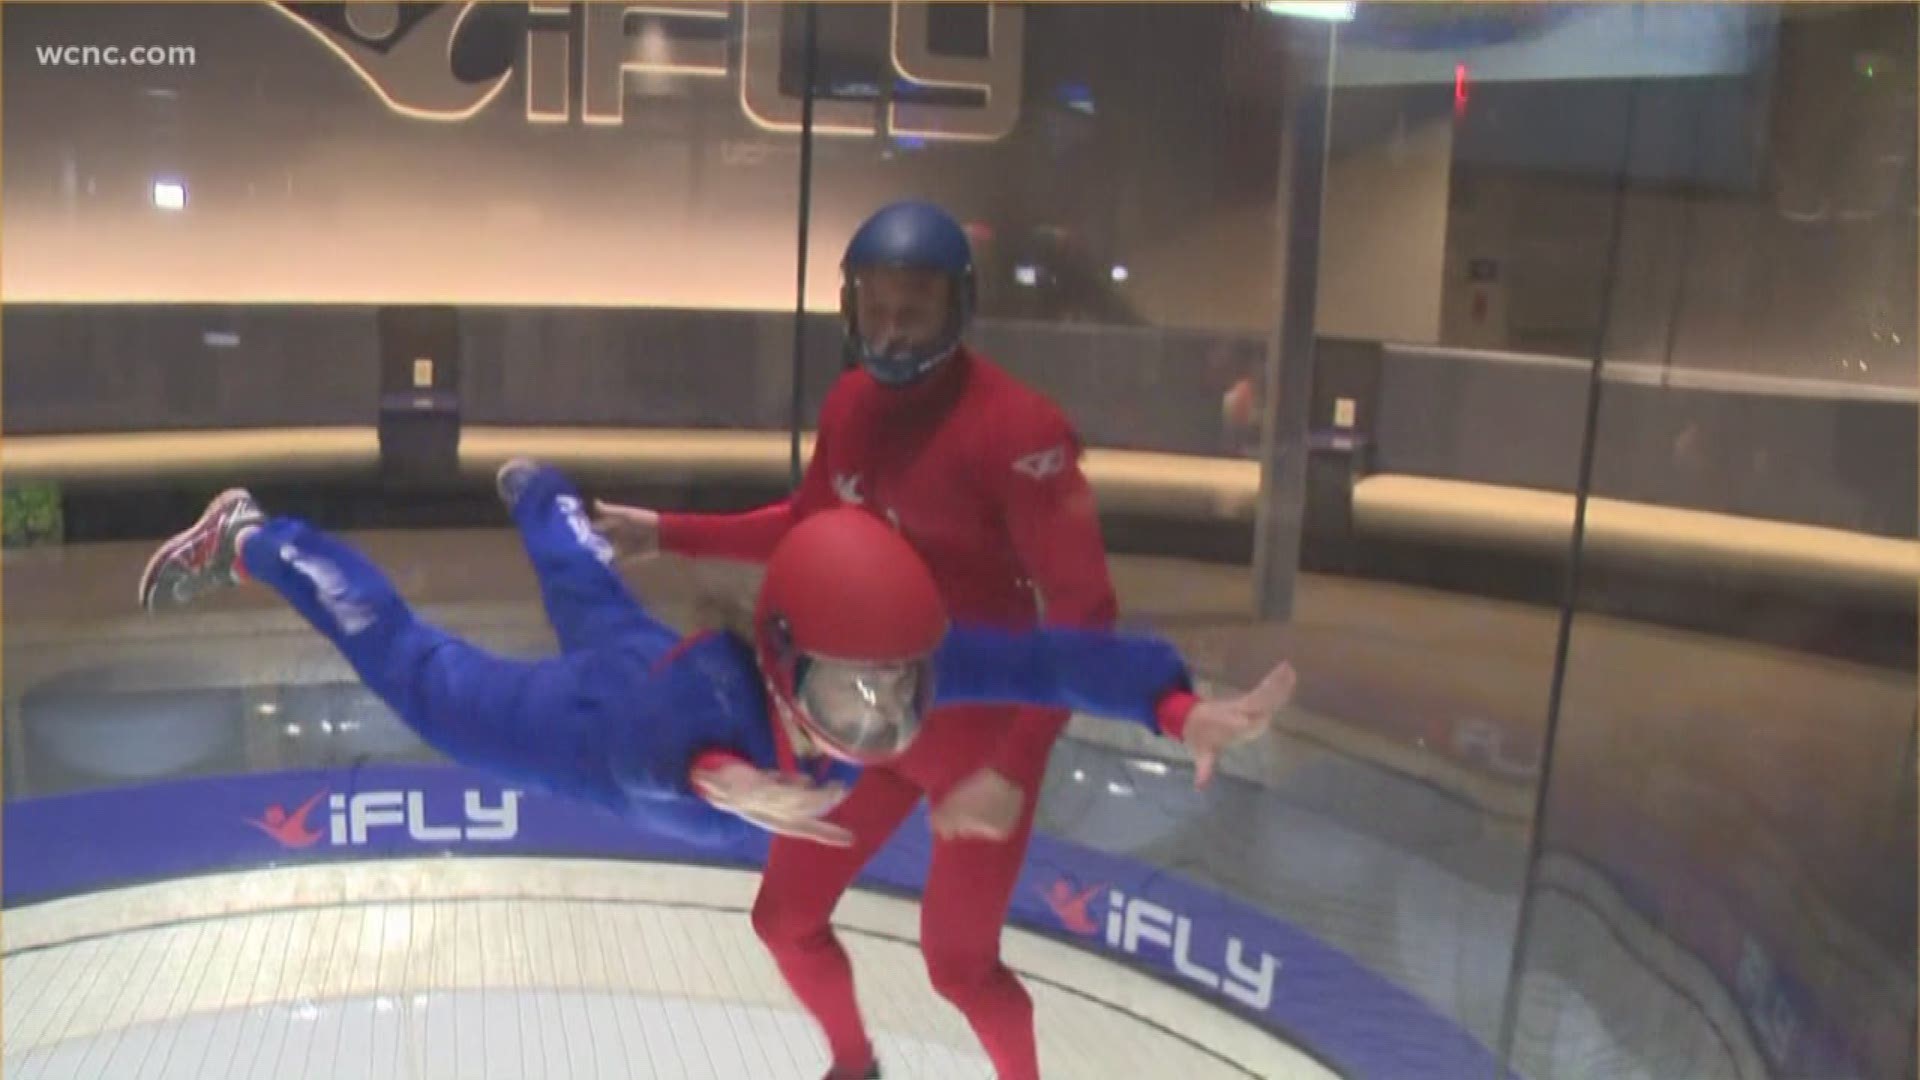 Inside iFly, North Carolina's only indoor skydiving facility